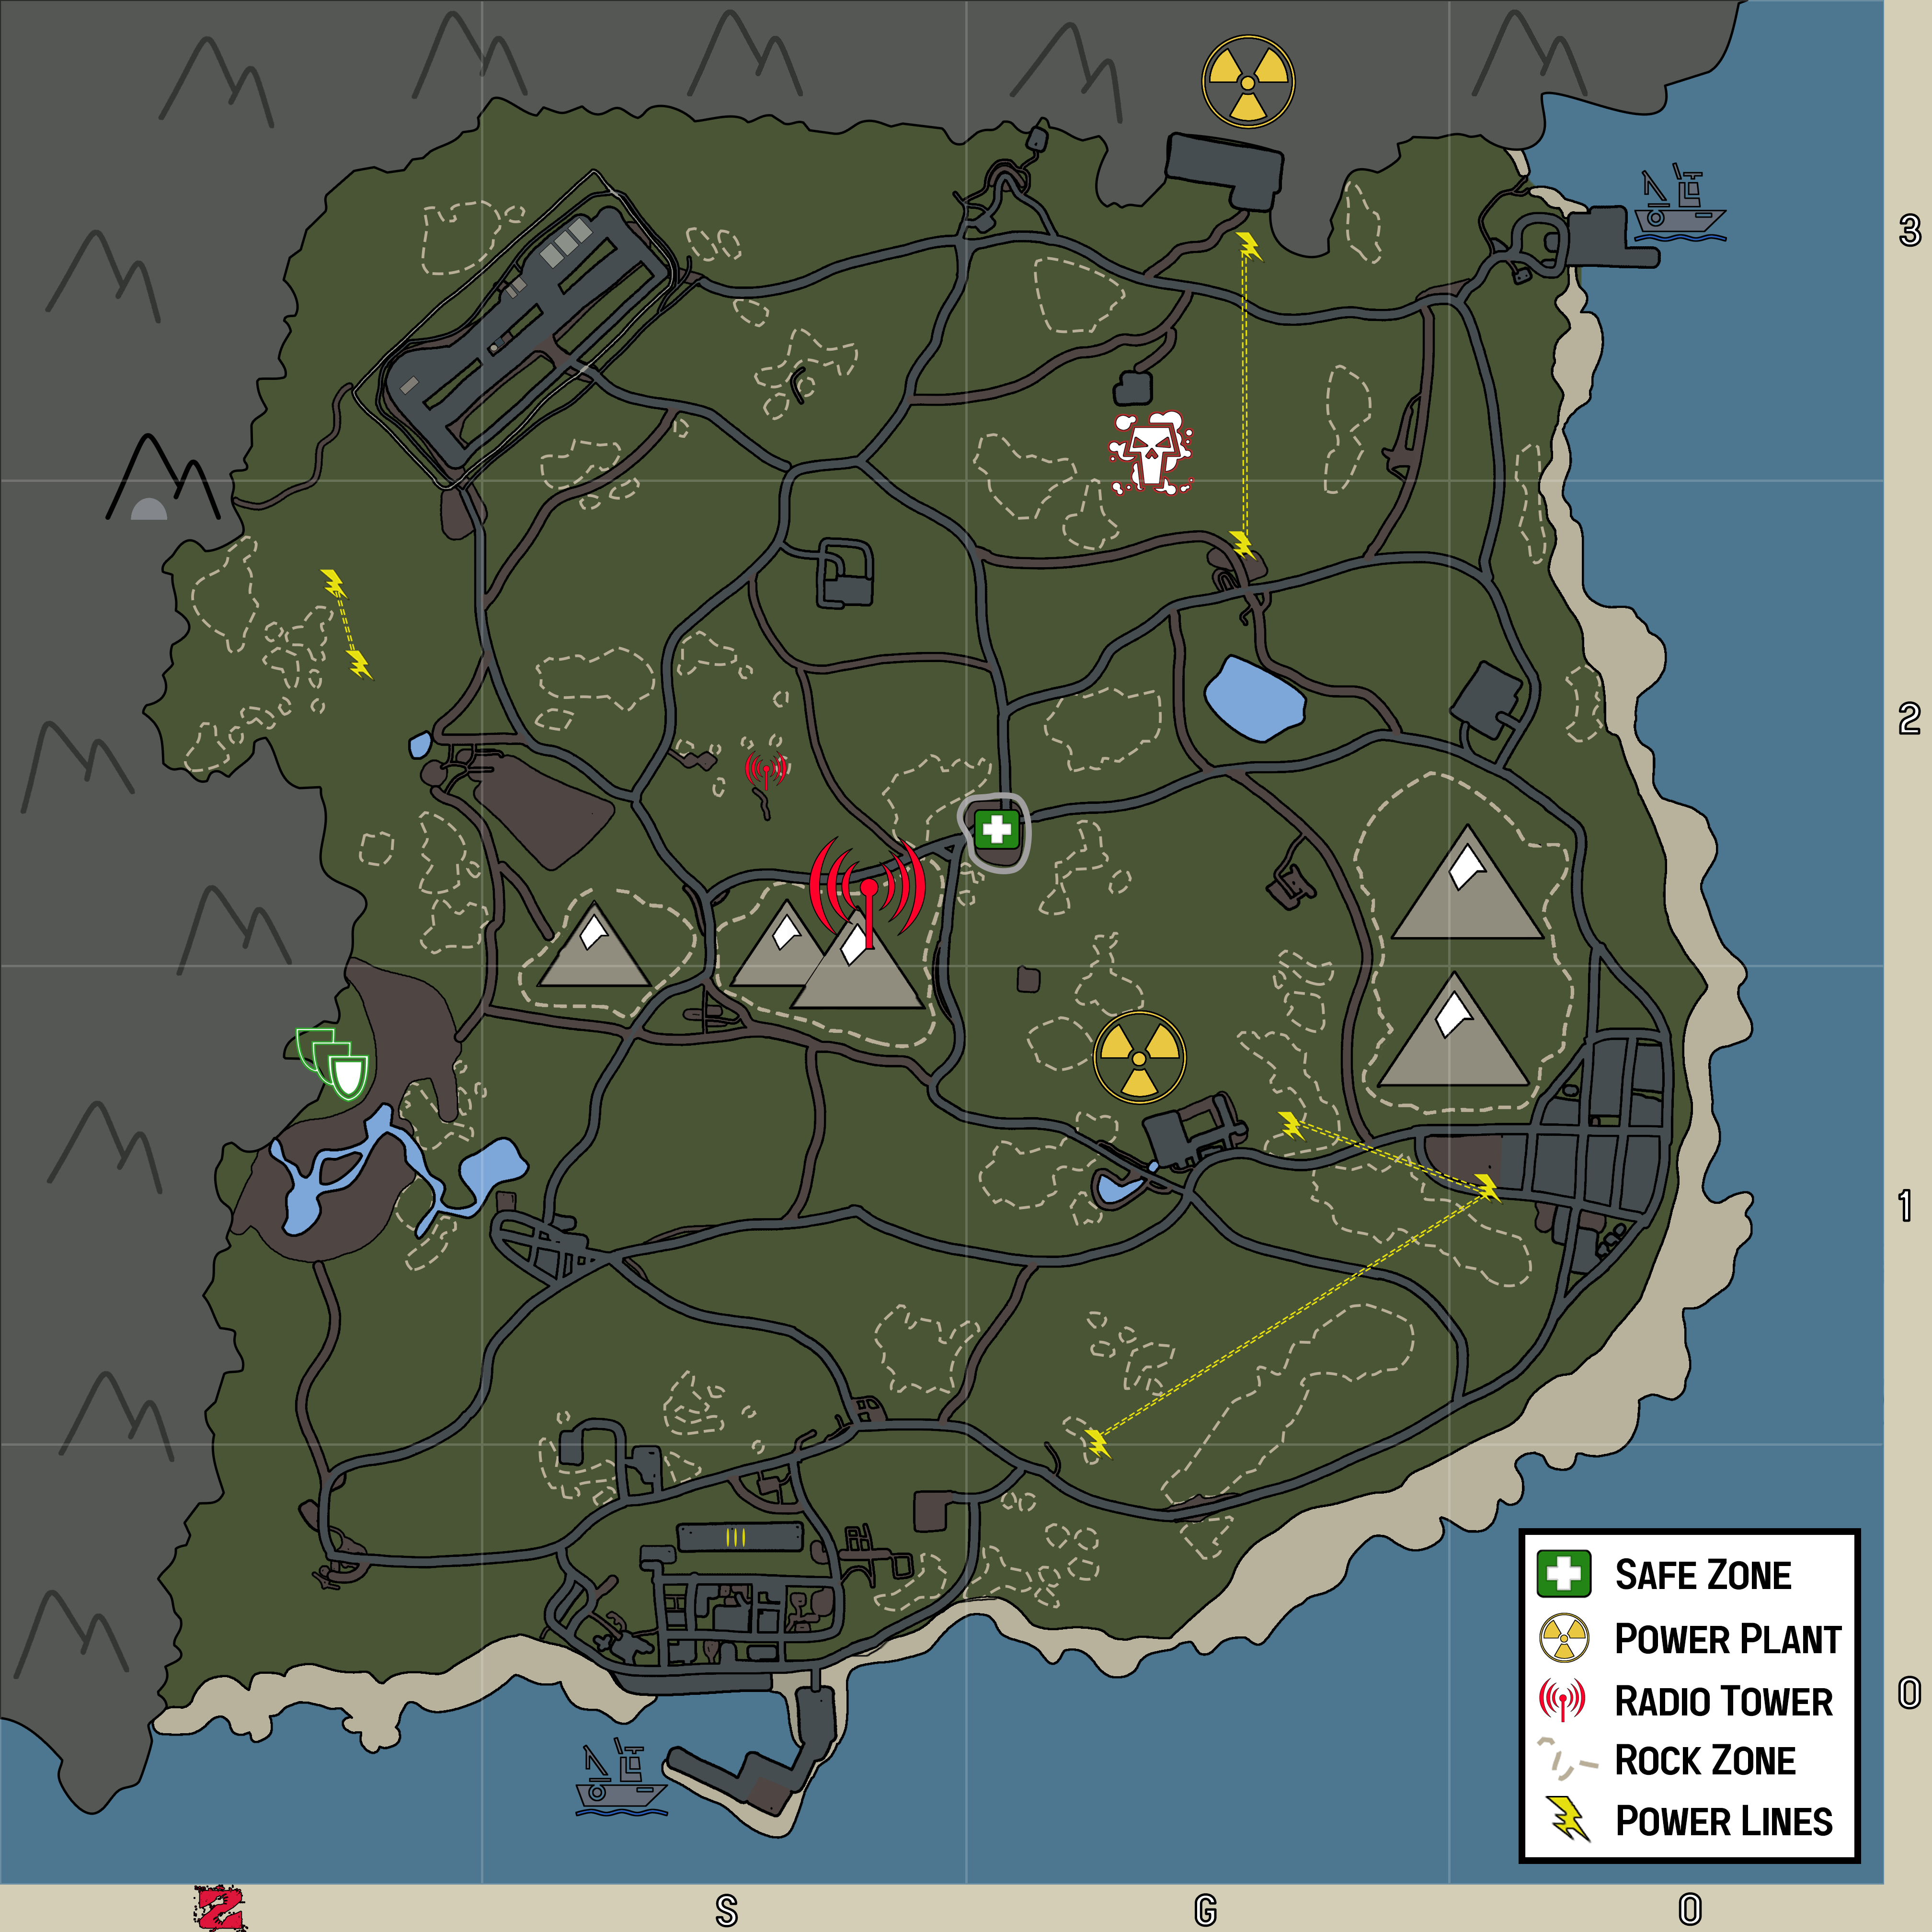 The in-game map for Zombie Survival Game Online. This map has references to landmarks and points of interest in the game.